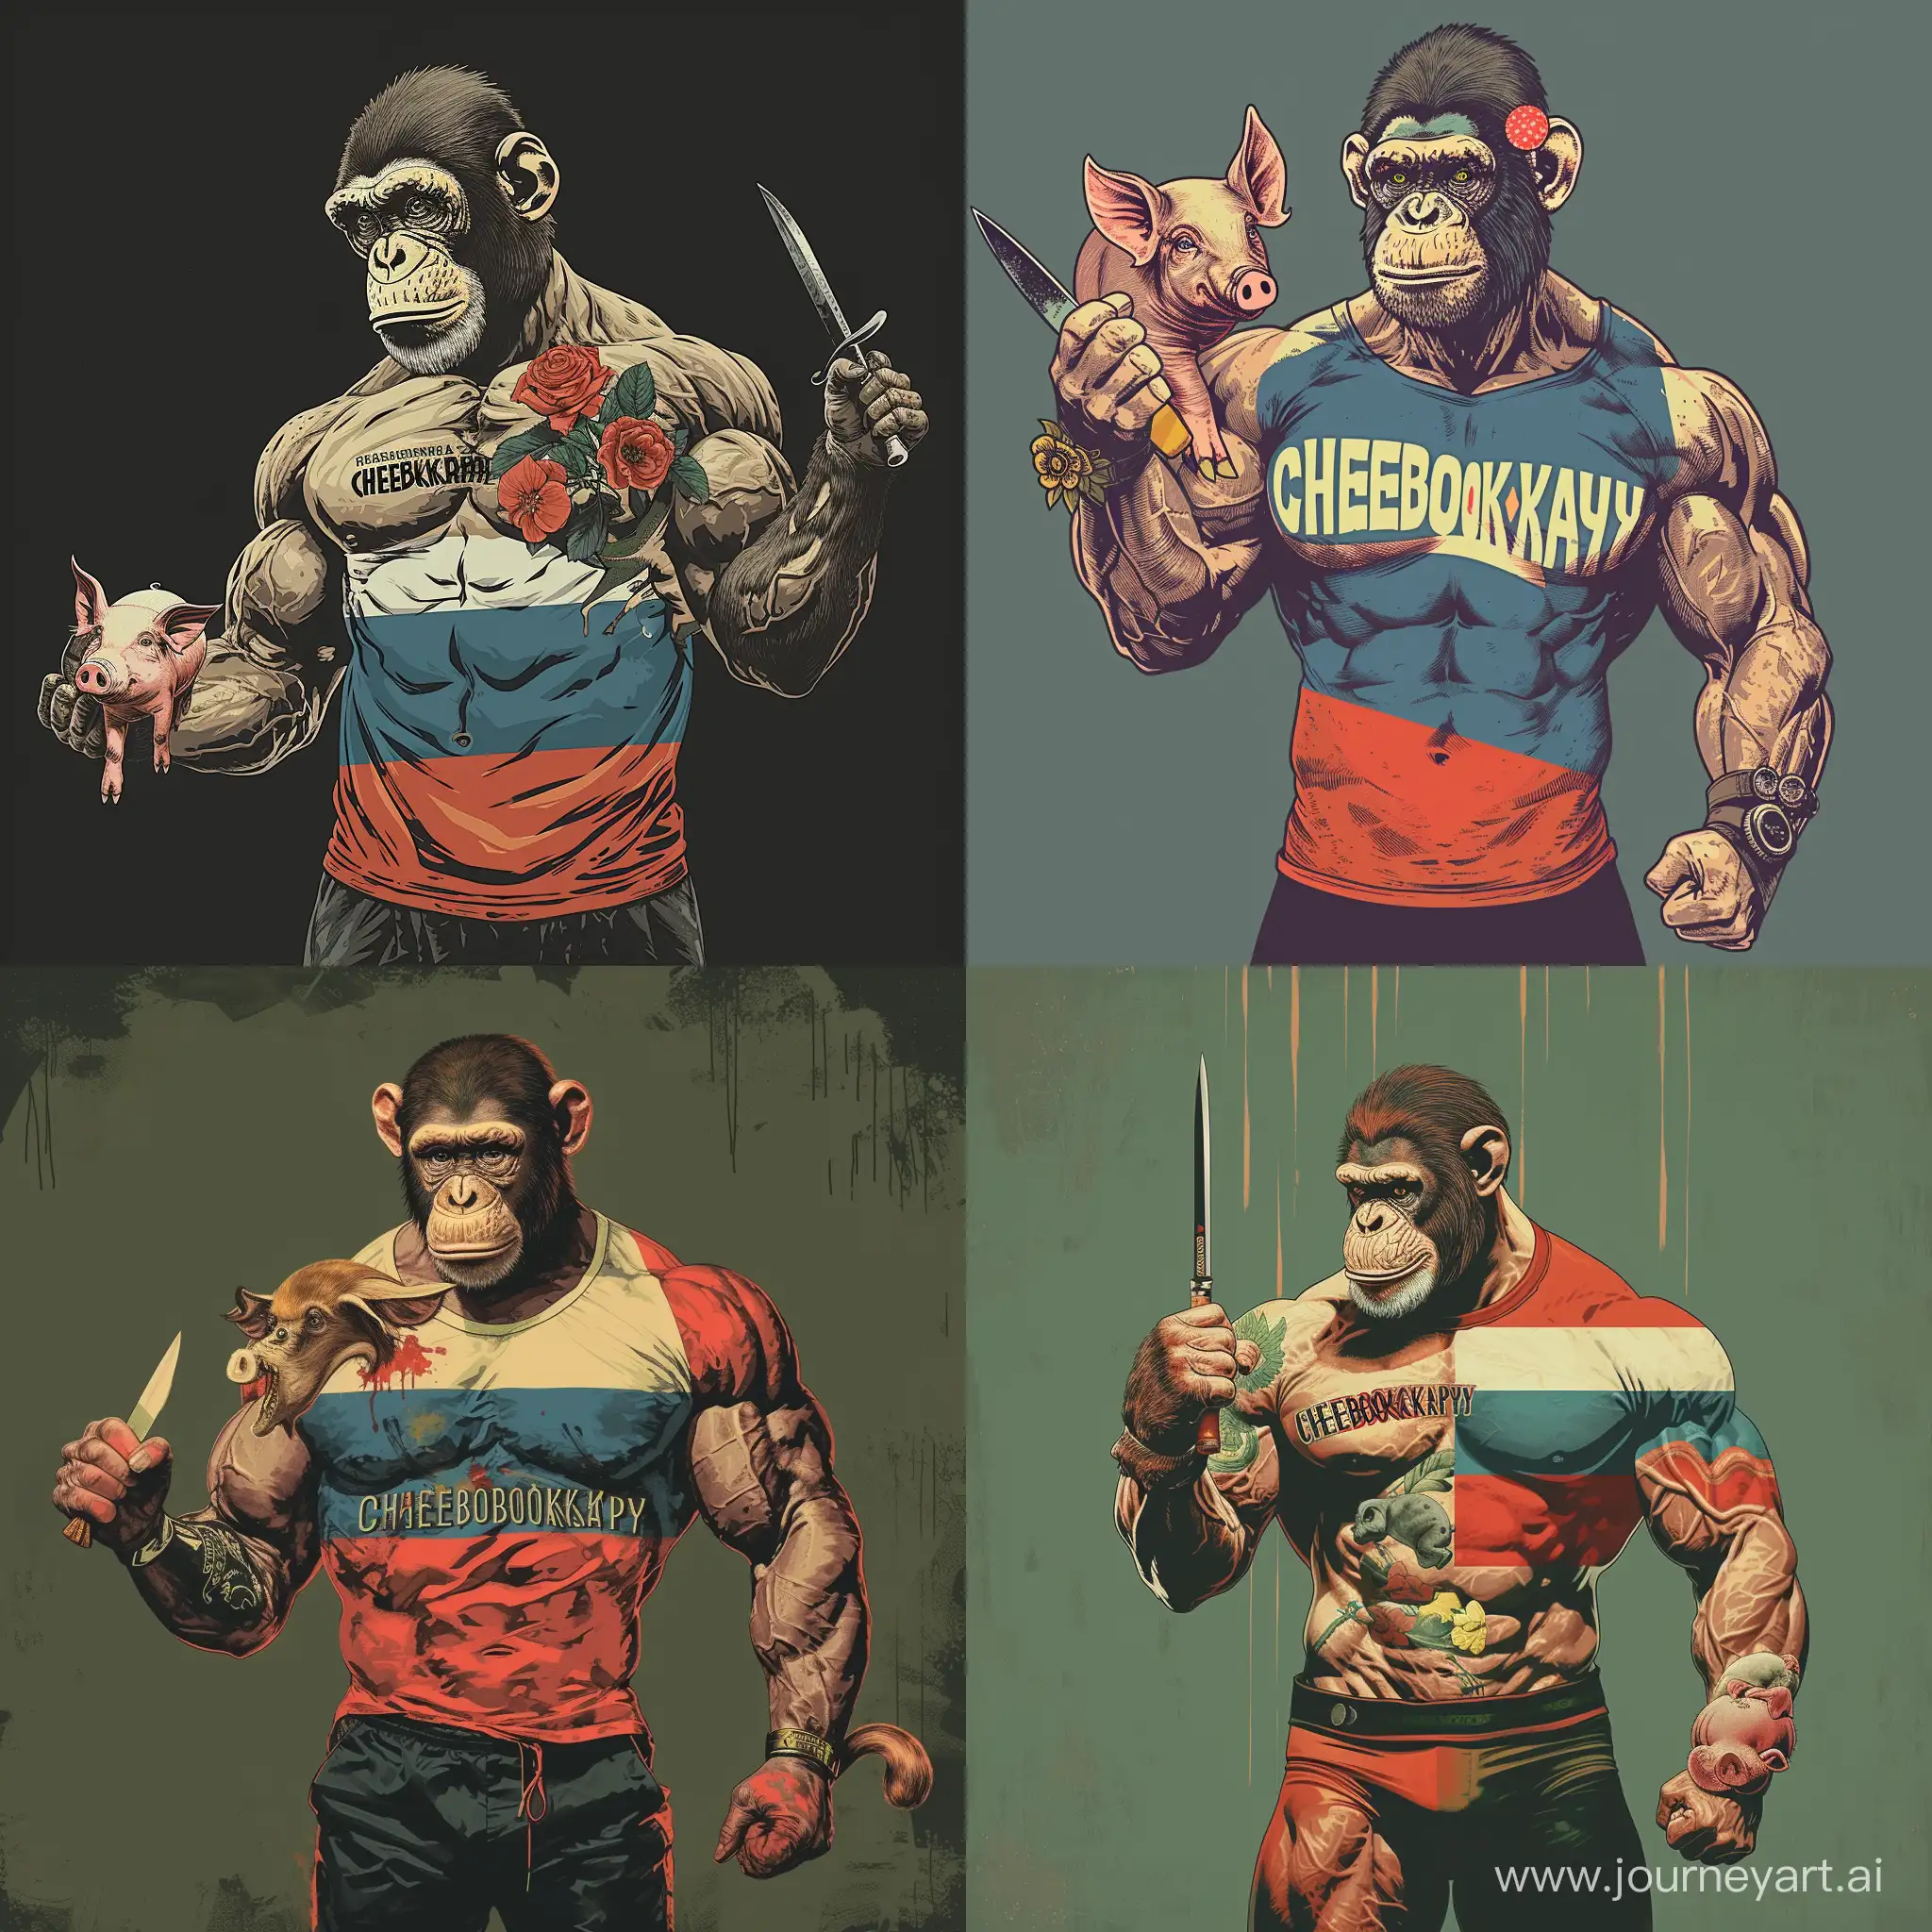 Muscular-MonkeyHeaded-Bodybuilder-Wielding-Patriotic-Knife-and-Holding-Pig